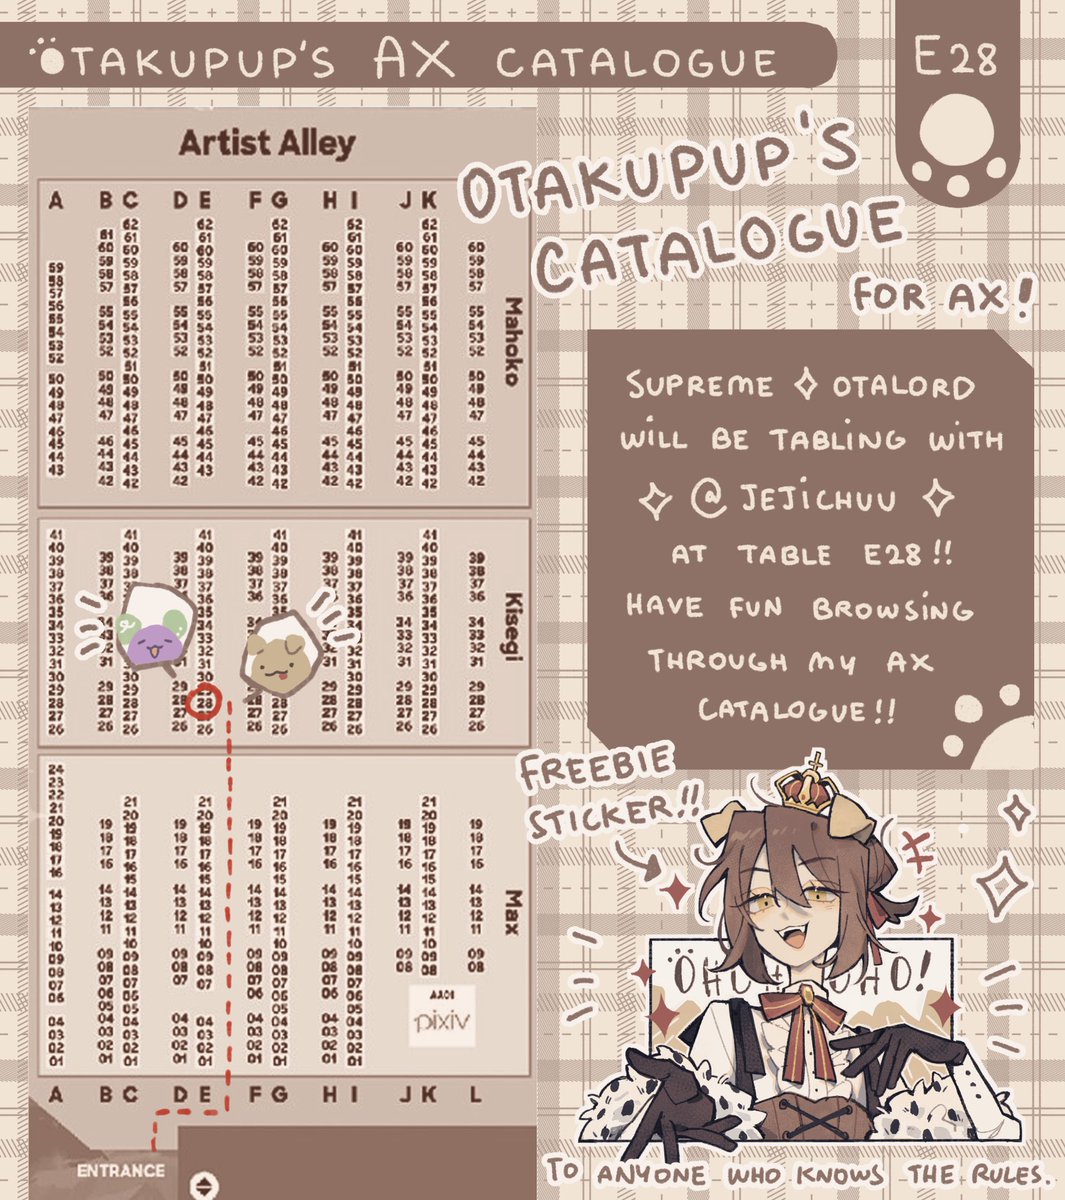 Mightve had too much fun makin my AX catalogue this year…  HAVE FUN LOOKING THROUGH AND YOU AT ANIME EXPO!!! ☺️ #AX2023 #AX2023ArtistAlley #AXArtistAlley2023  (1/3)